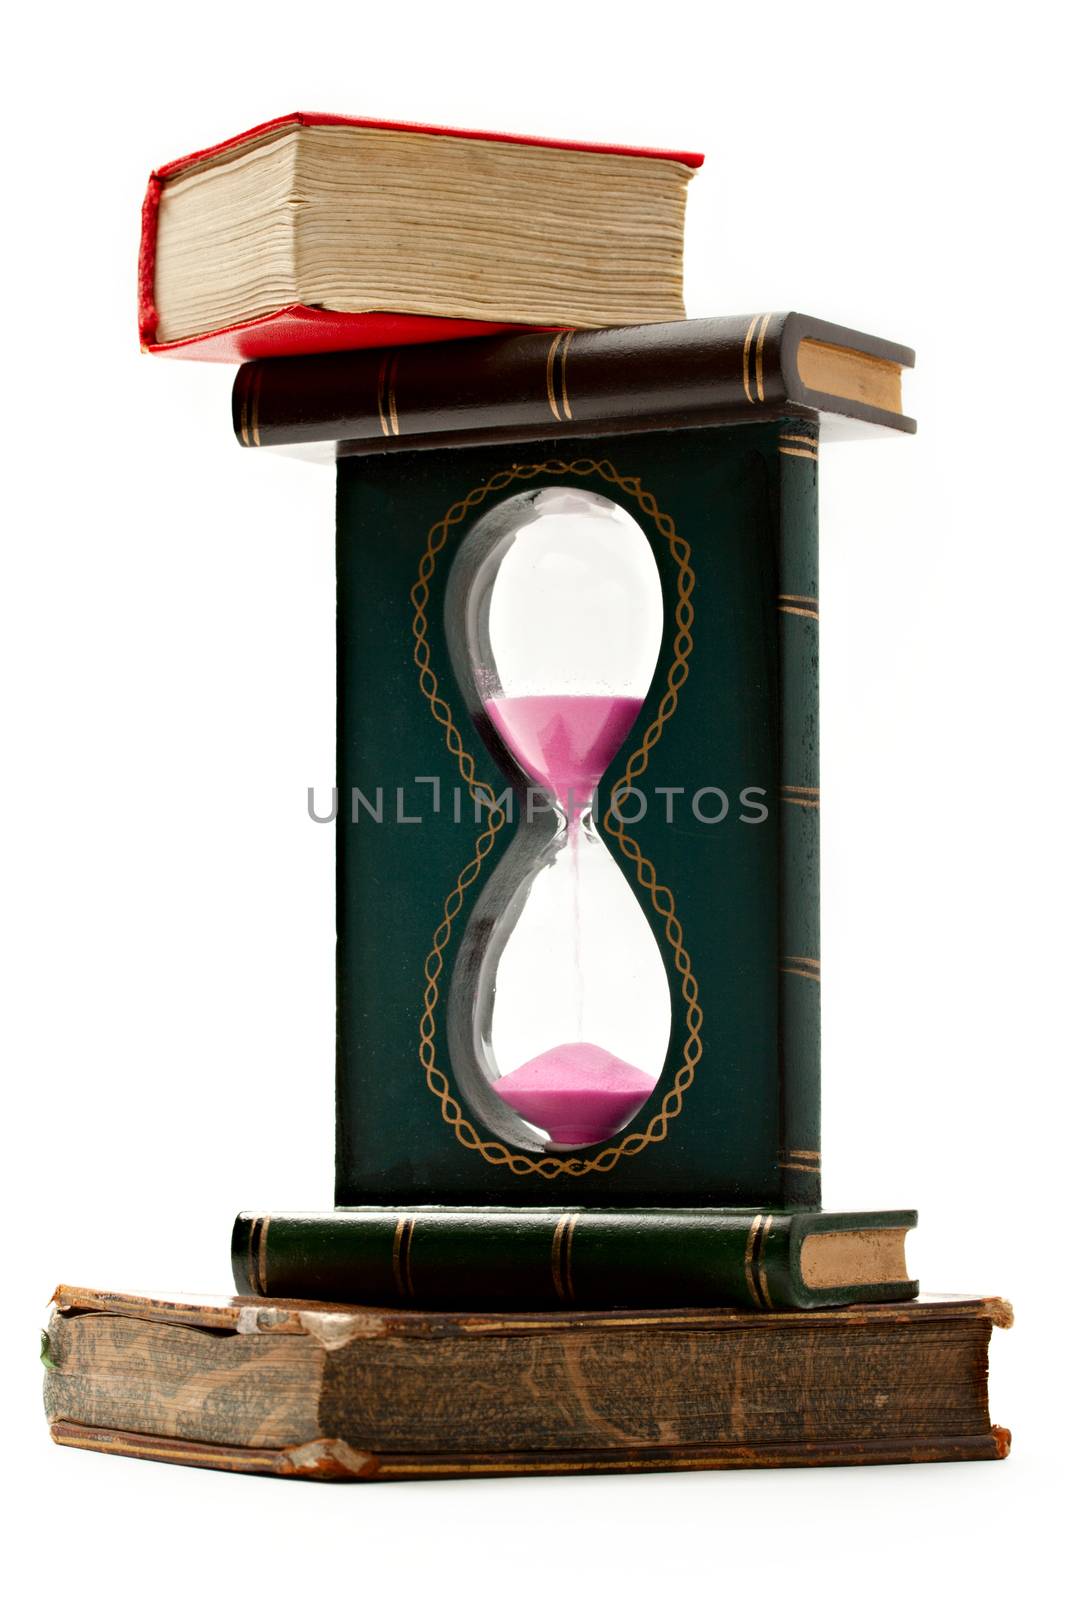 Old books and sand glass by Garsya